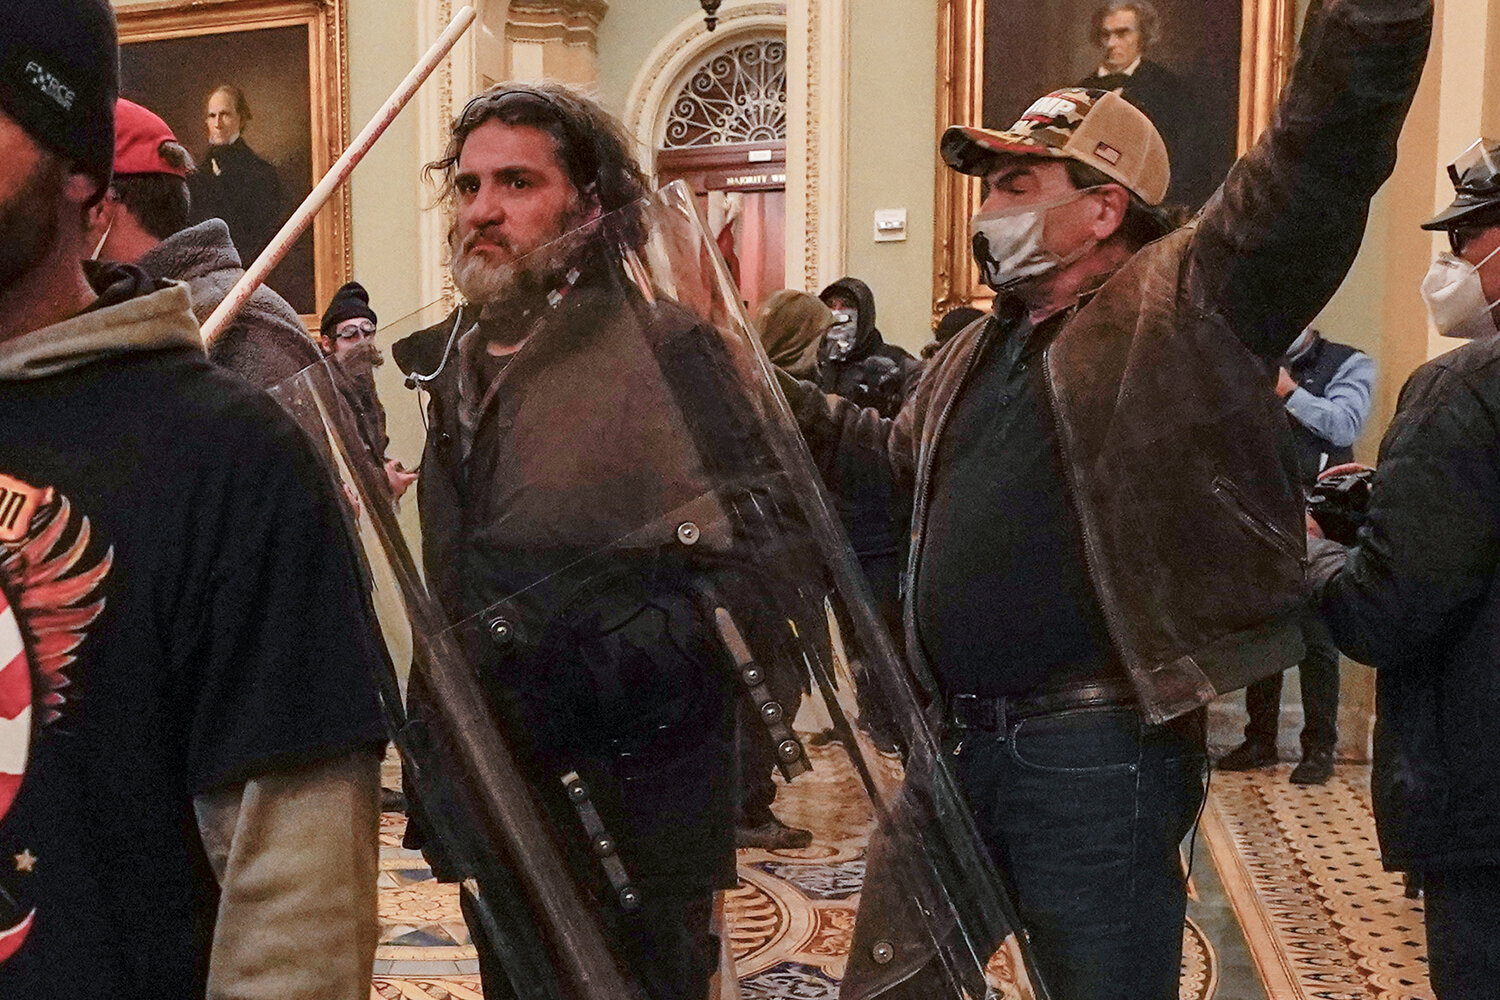 FILE - Rioters, including Dominic Pezzola, center with police shield, are confronted by U.S. Capitol Police officers outside the Senate Chamber inside the Capitol, Wednesday, Jan. 6, 2021, in Washington. A federal jury is scheduled to hear a second day of attorneysâ closing arguments in the landmark trial for former Proud Boys extremist group leaders charged with plotting to violently stop the transfer of presidential power after the 2020 election.(AP Photo/Manuel Balce Ceneta, File)